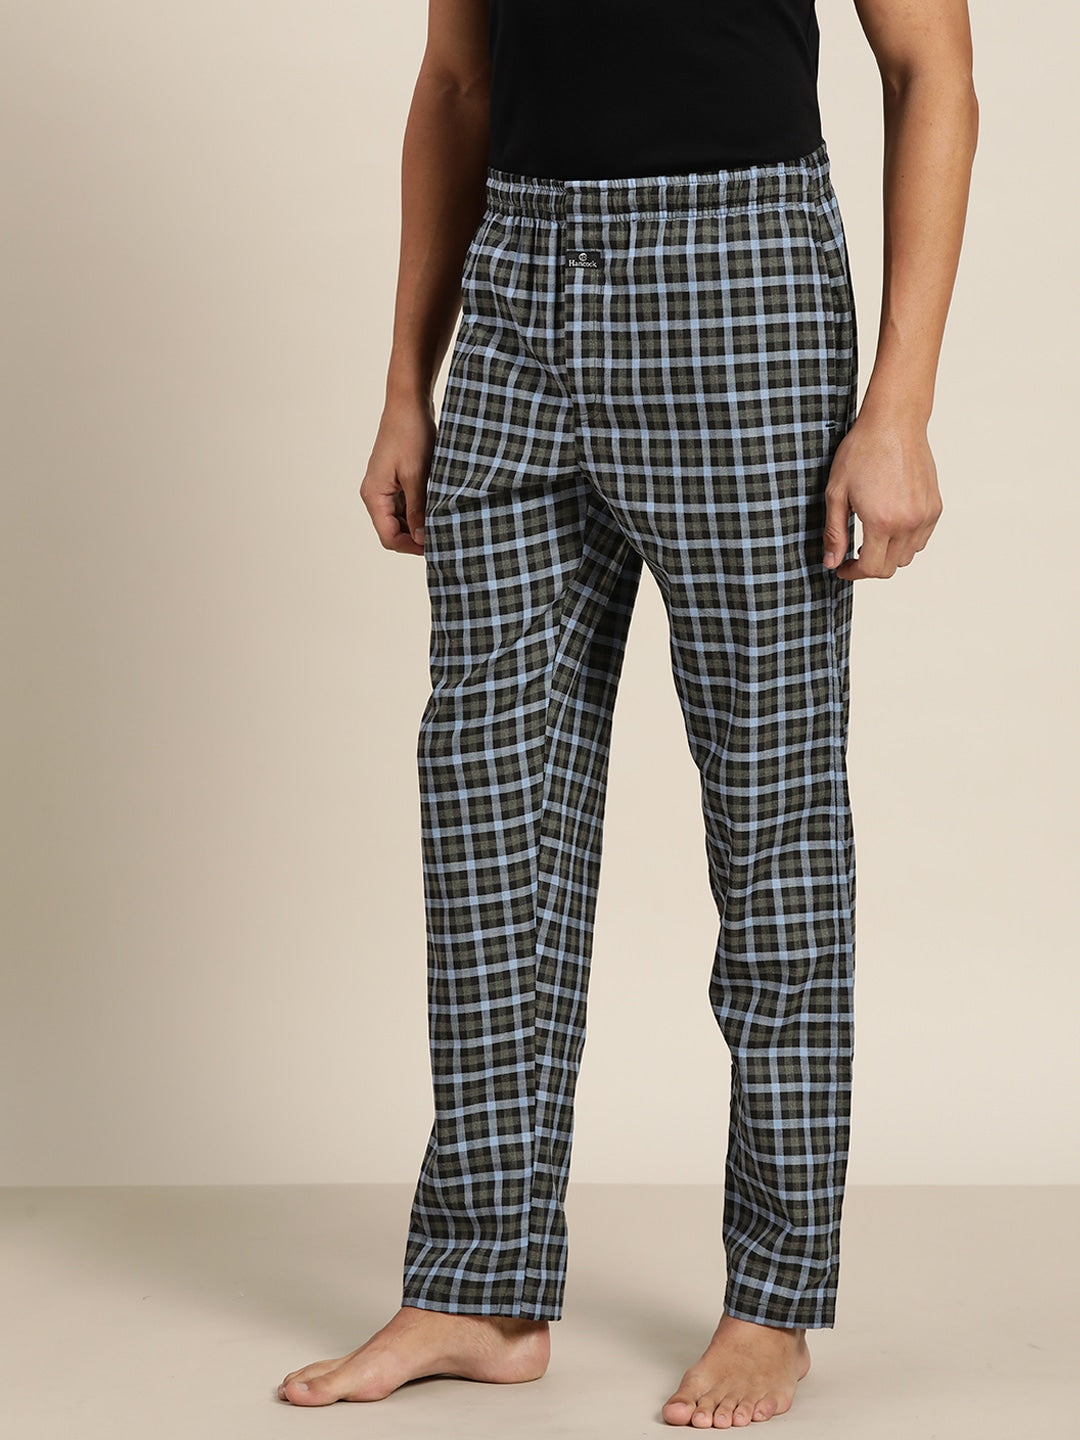 Buy White Black Check Regular Fit Solid Trouser Cotton for Best Price,  Reviews, Free Shipping